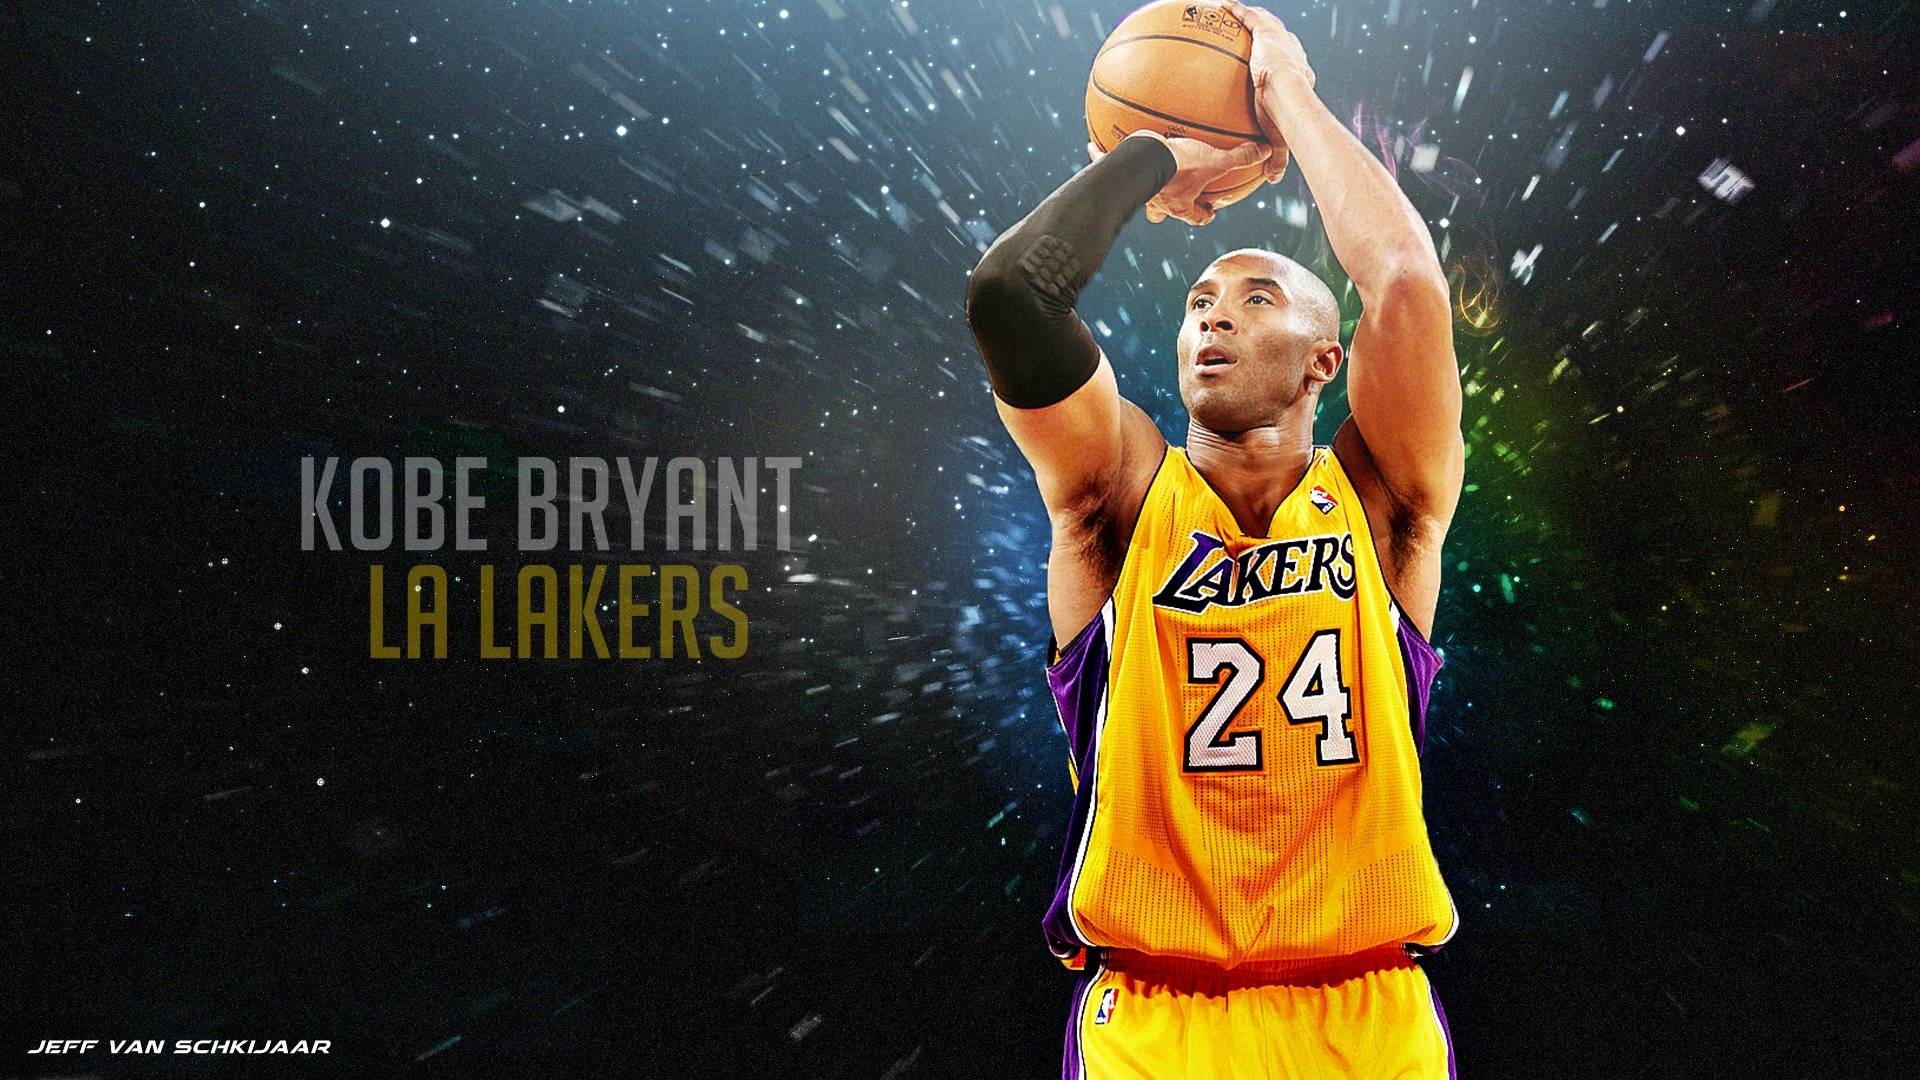 Lakers Wallpaper Images on